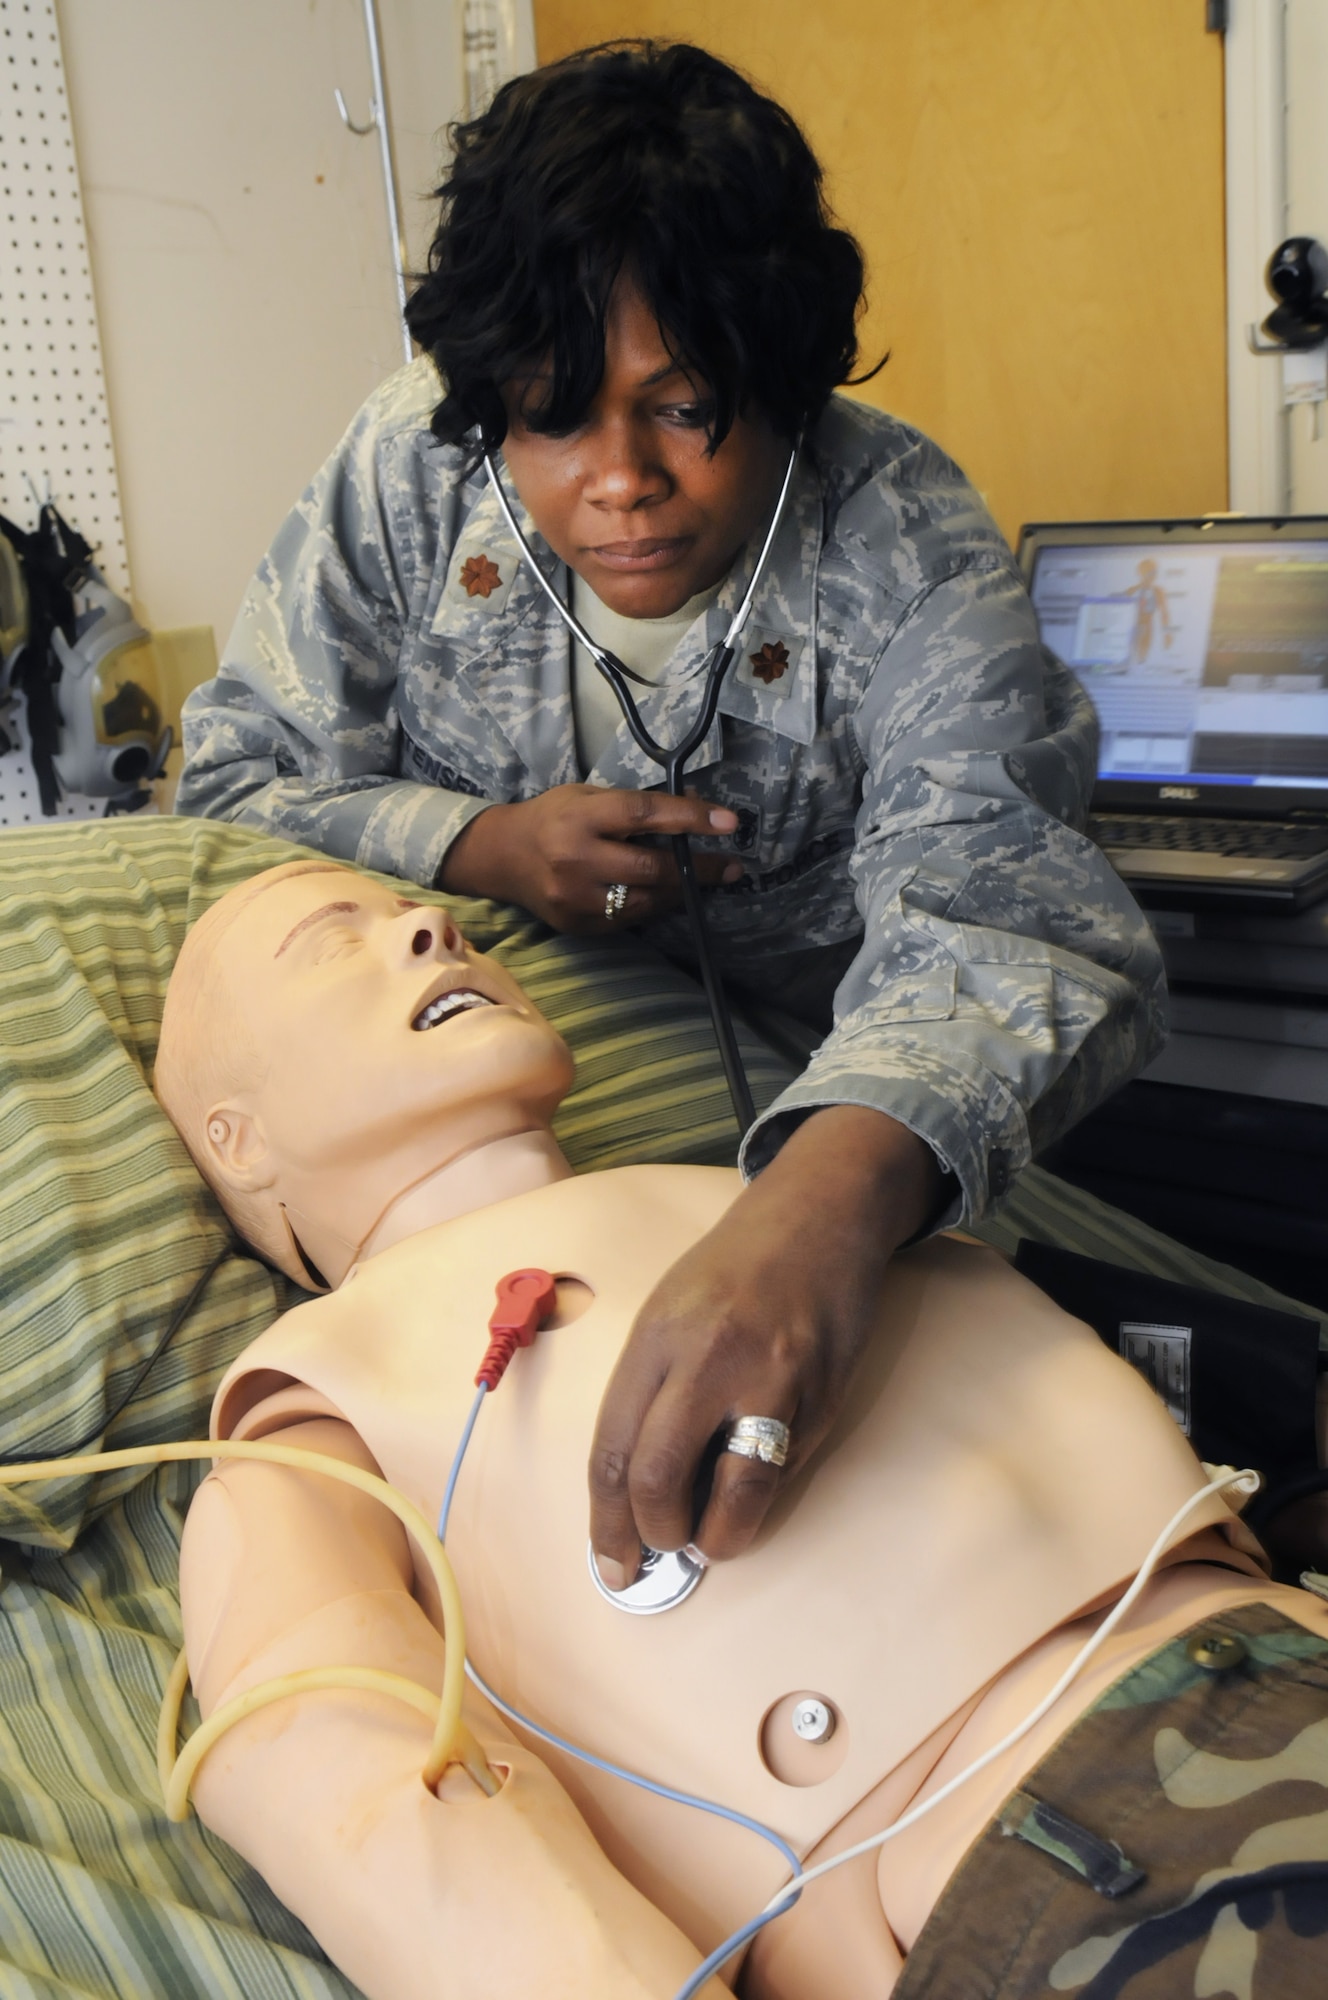 Maj. Phaedra Christenson demonstrates how the Simman can be programmed to simulate realistic symptoms as a training tool. U. S. Air Force photo by Sue Sapp